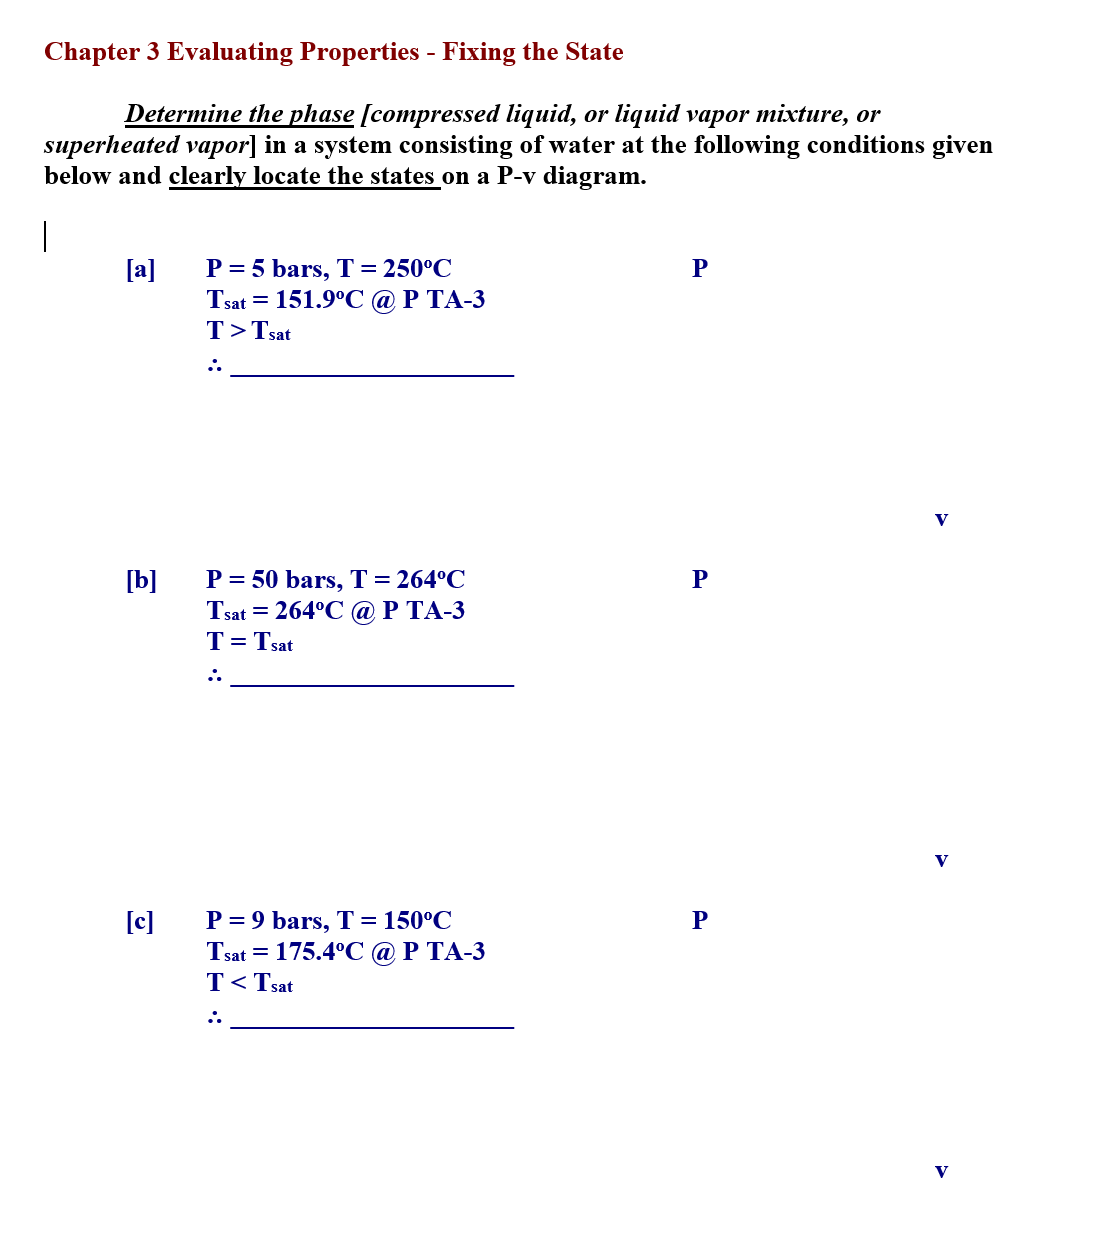 Chapter 3 Evaluating Properties - Fixing the State
Determine the phase [compressed liquid, or liquid vapor mixture, or
superheated vapor] in a system consisting of water at the following conditions given
below and clearly locate the states on a P-v diagram.
|
[a]
P = 5 bars, T= 250°C
Тsat —D 151.9°С @Р ТА-3
T>Tsat
V
[b]
P = 50 bars, T=264°C
Tsat = 264°C @ P TA-3
T= Tsat
V
[c]
P = 9 bars, T = 150°C
Tsat = 175.4°C @ P TA-3
T<Tsat
V
